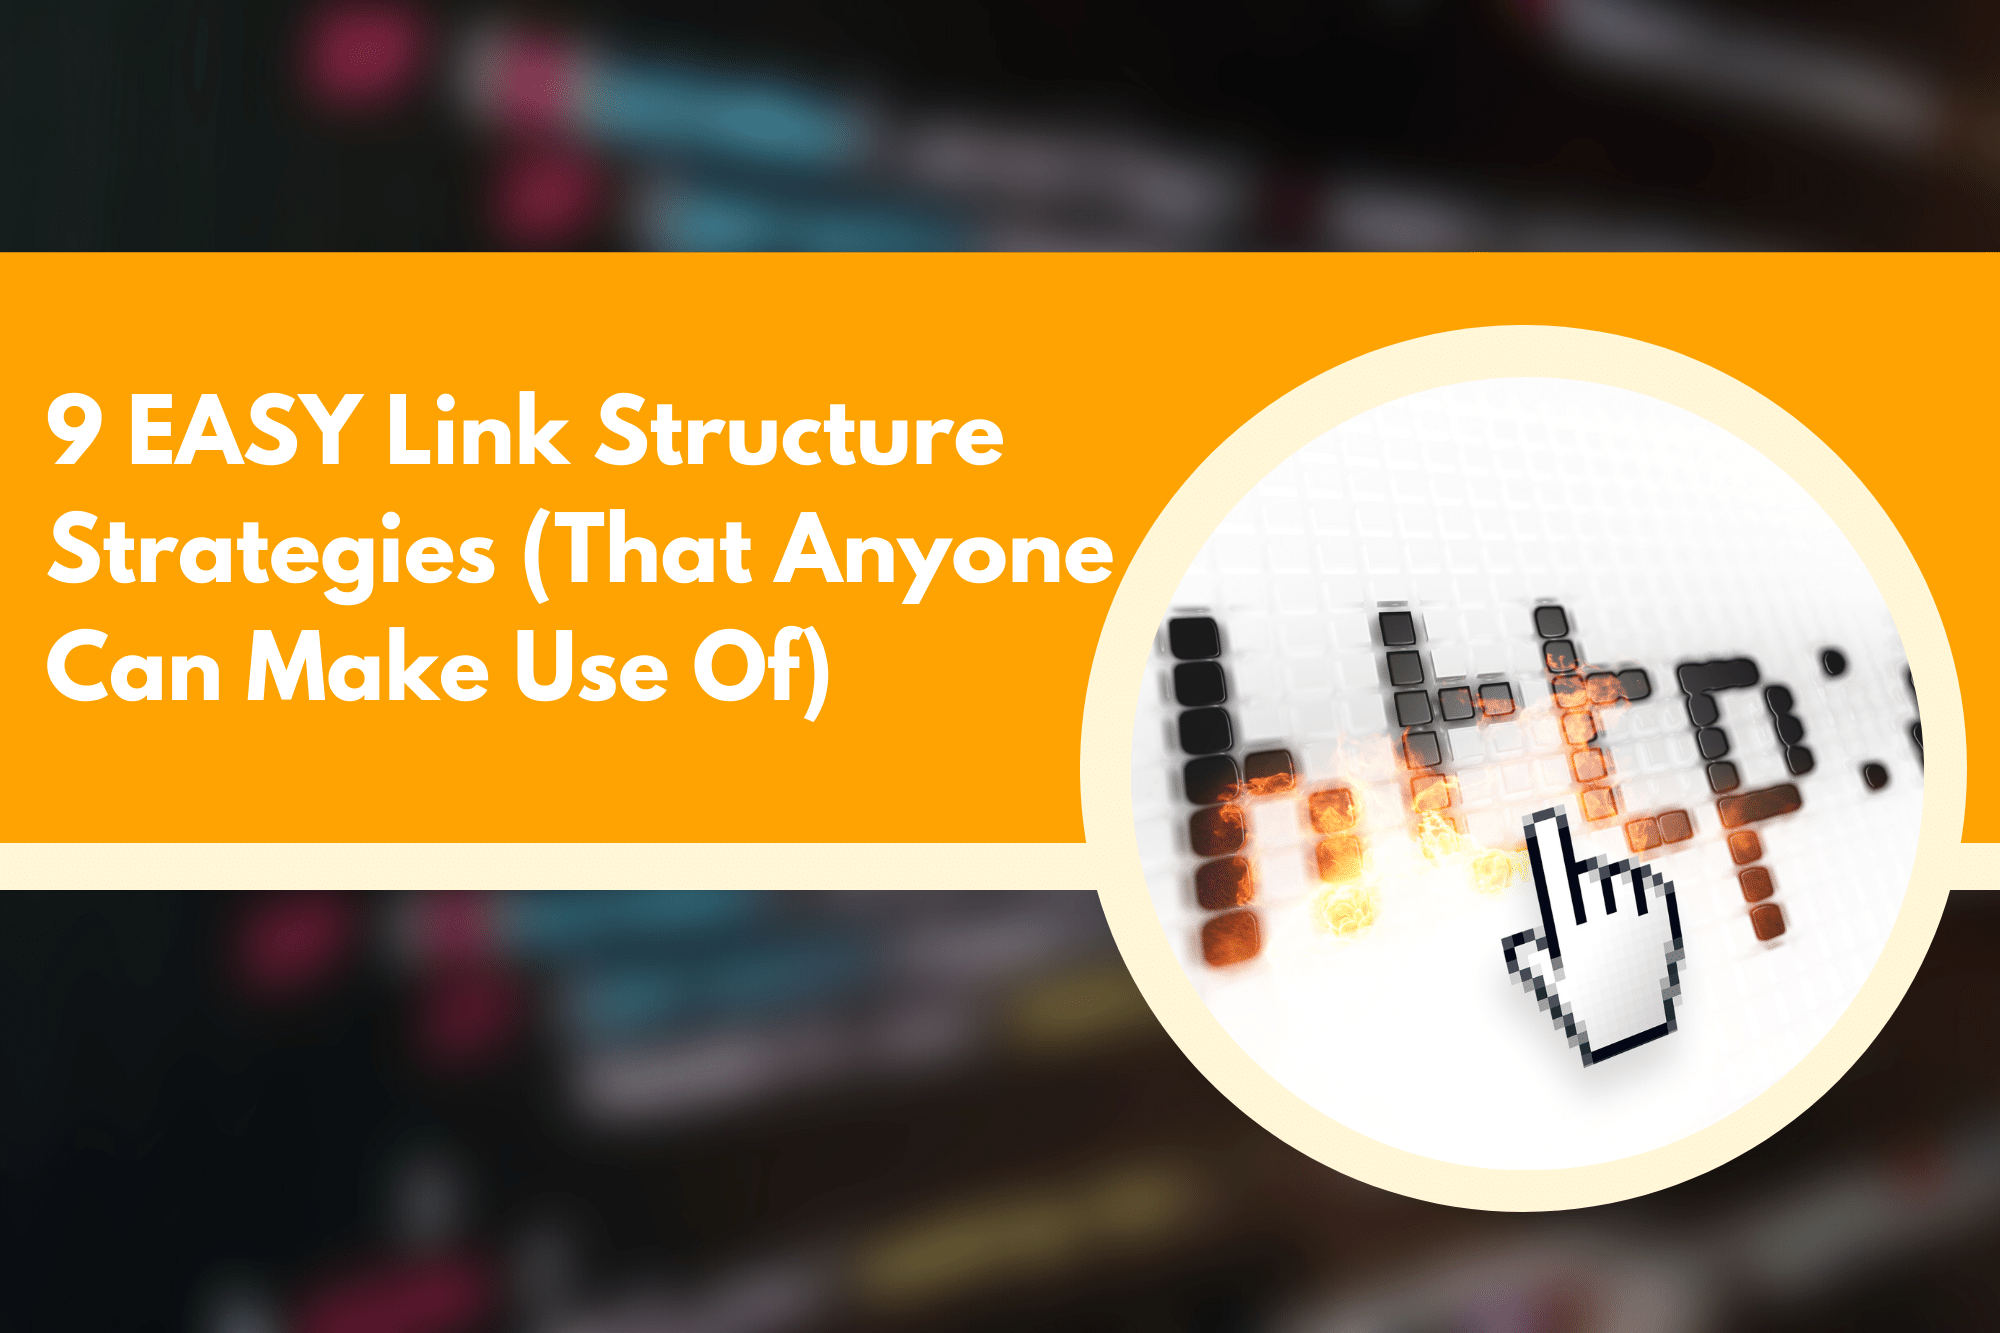 9 EASY Link Structure Strategies (That Anyone Can Make Use Of)